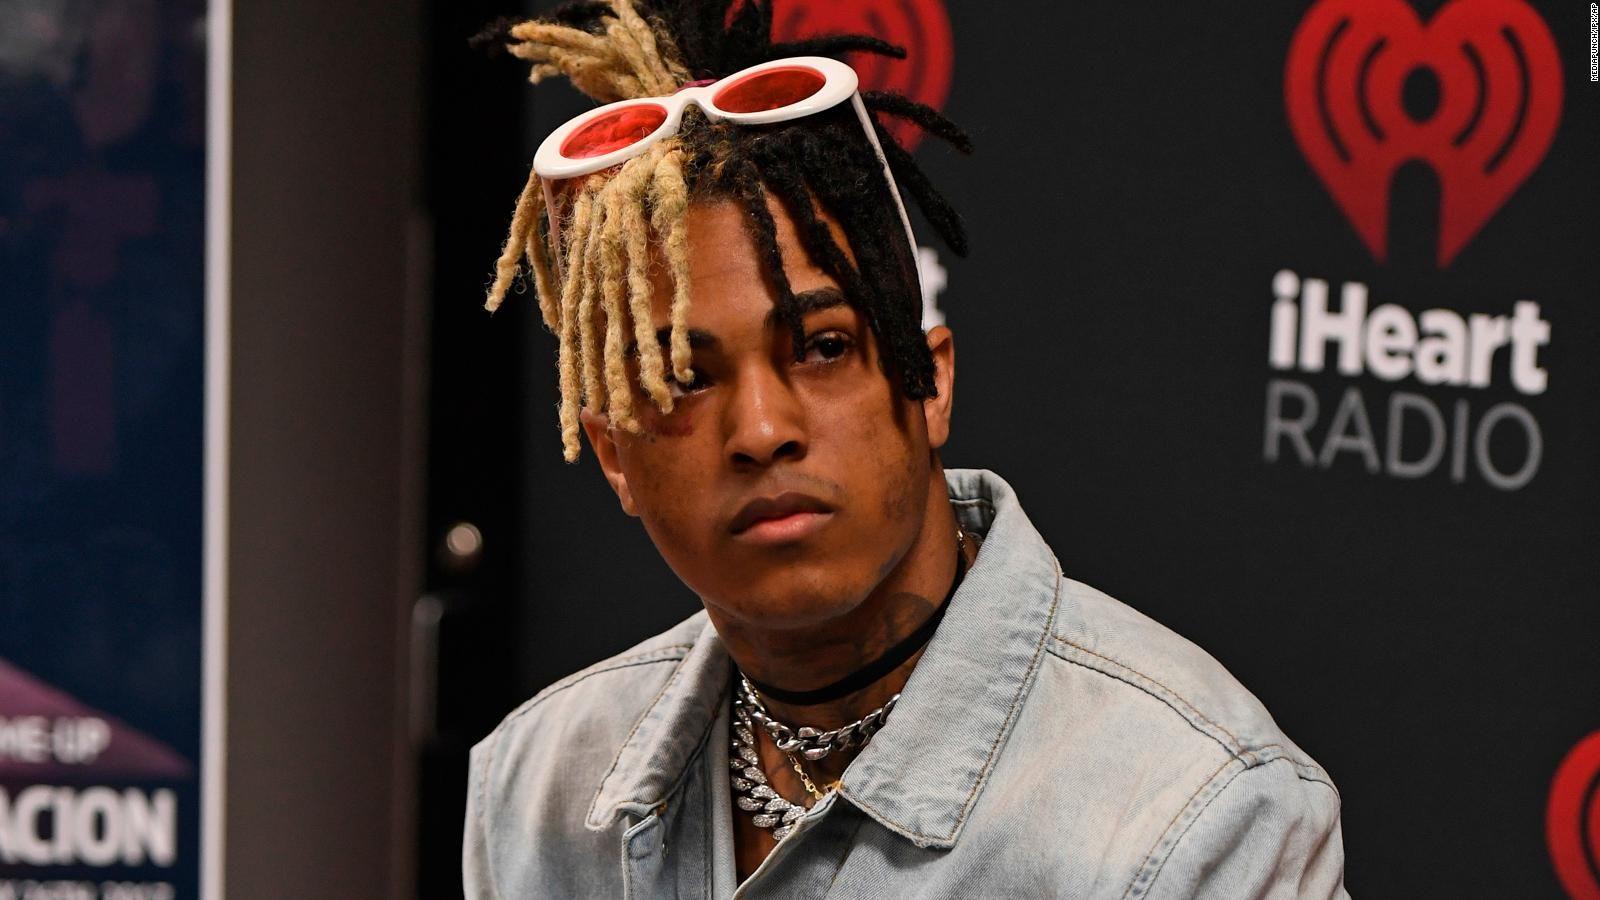 Let XXXTentacion's passing spell the end of his fame (opinion)